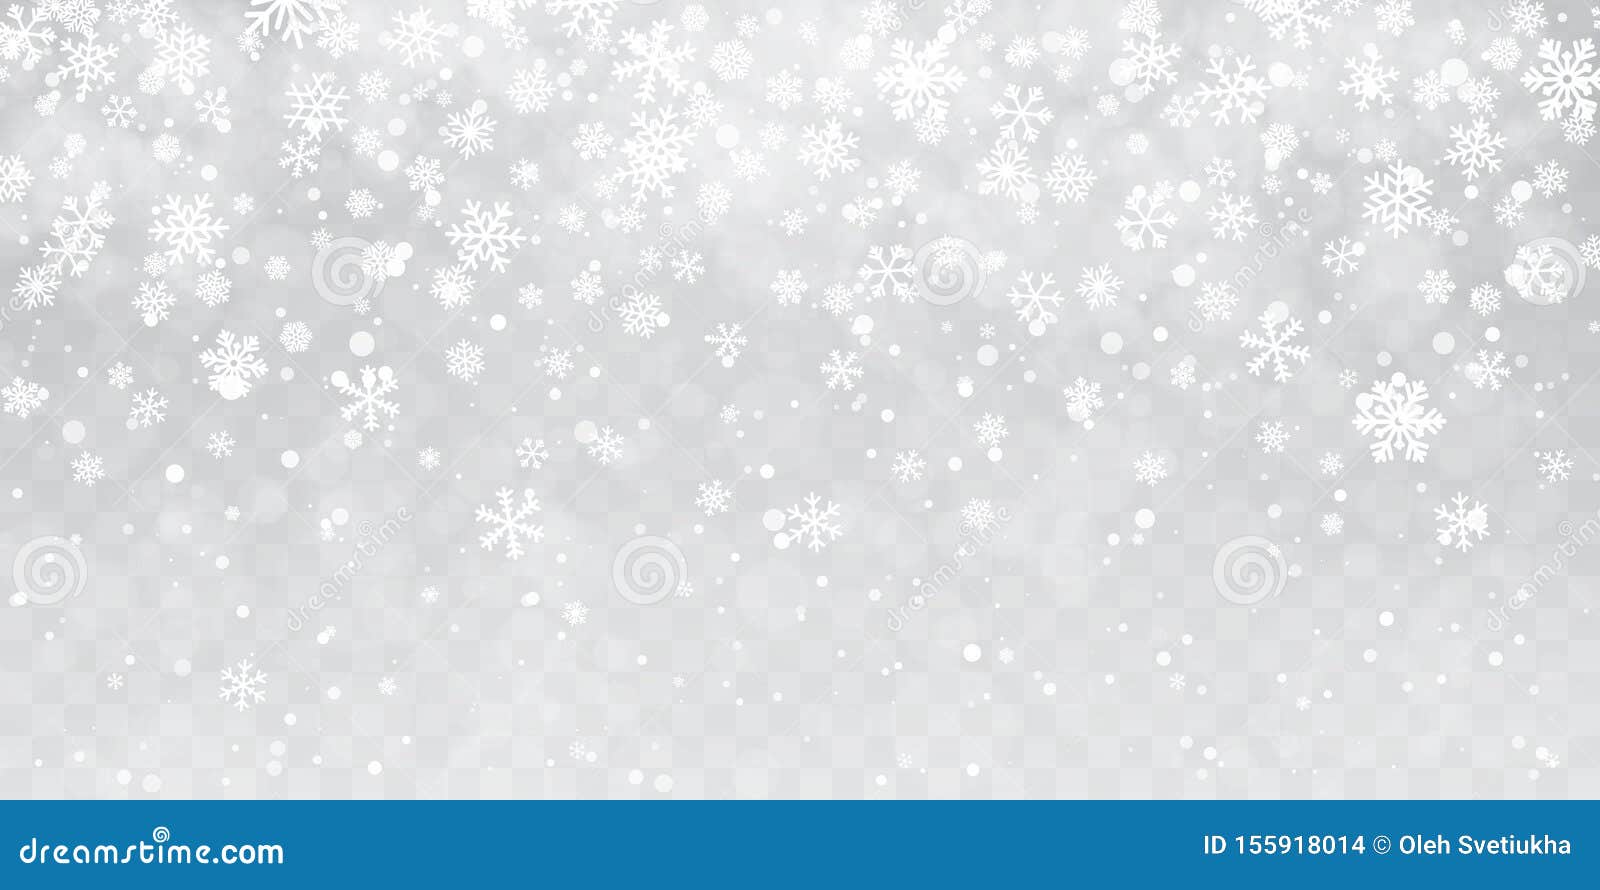 christmas snow. heavy snowfall. falling snowflakes on transparent background. white snowflakes flying in the air. 